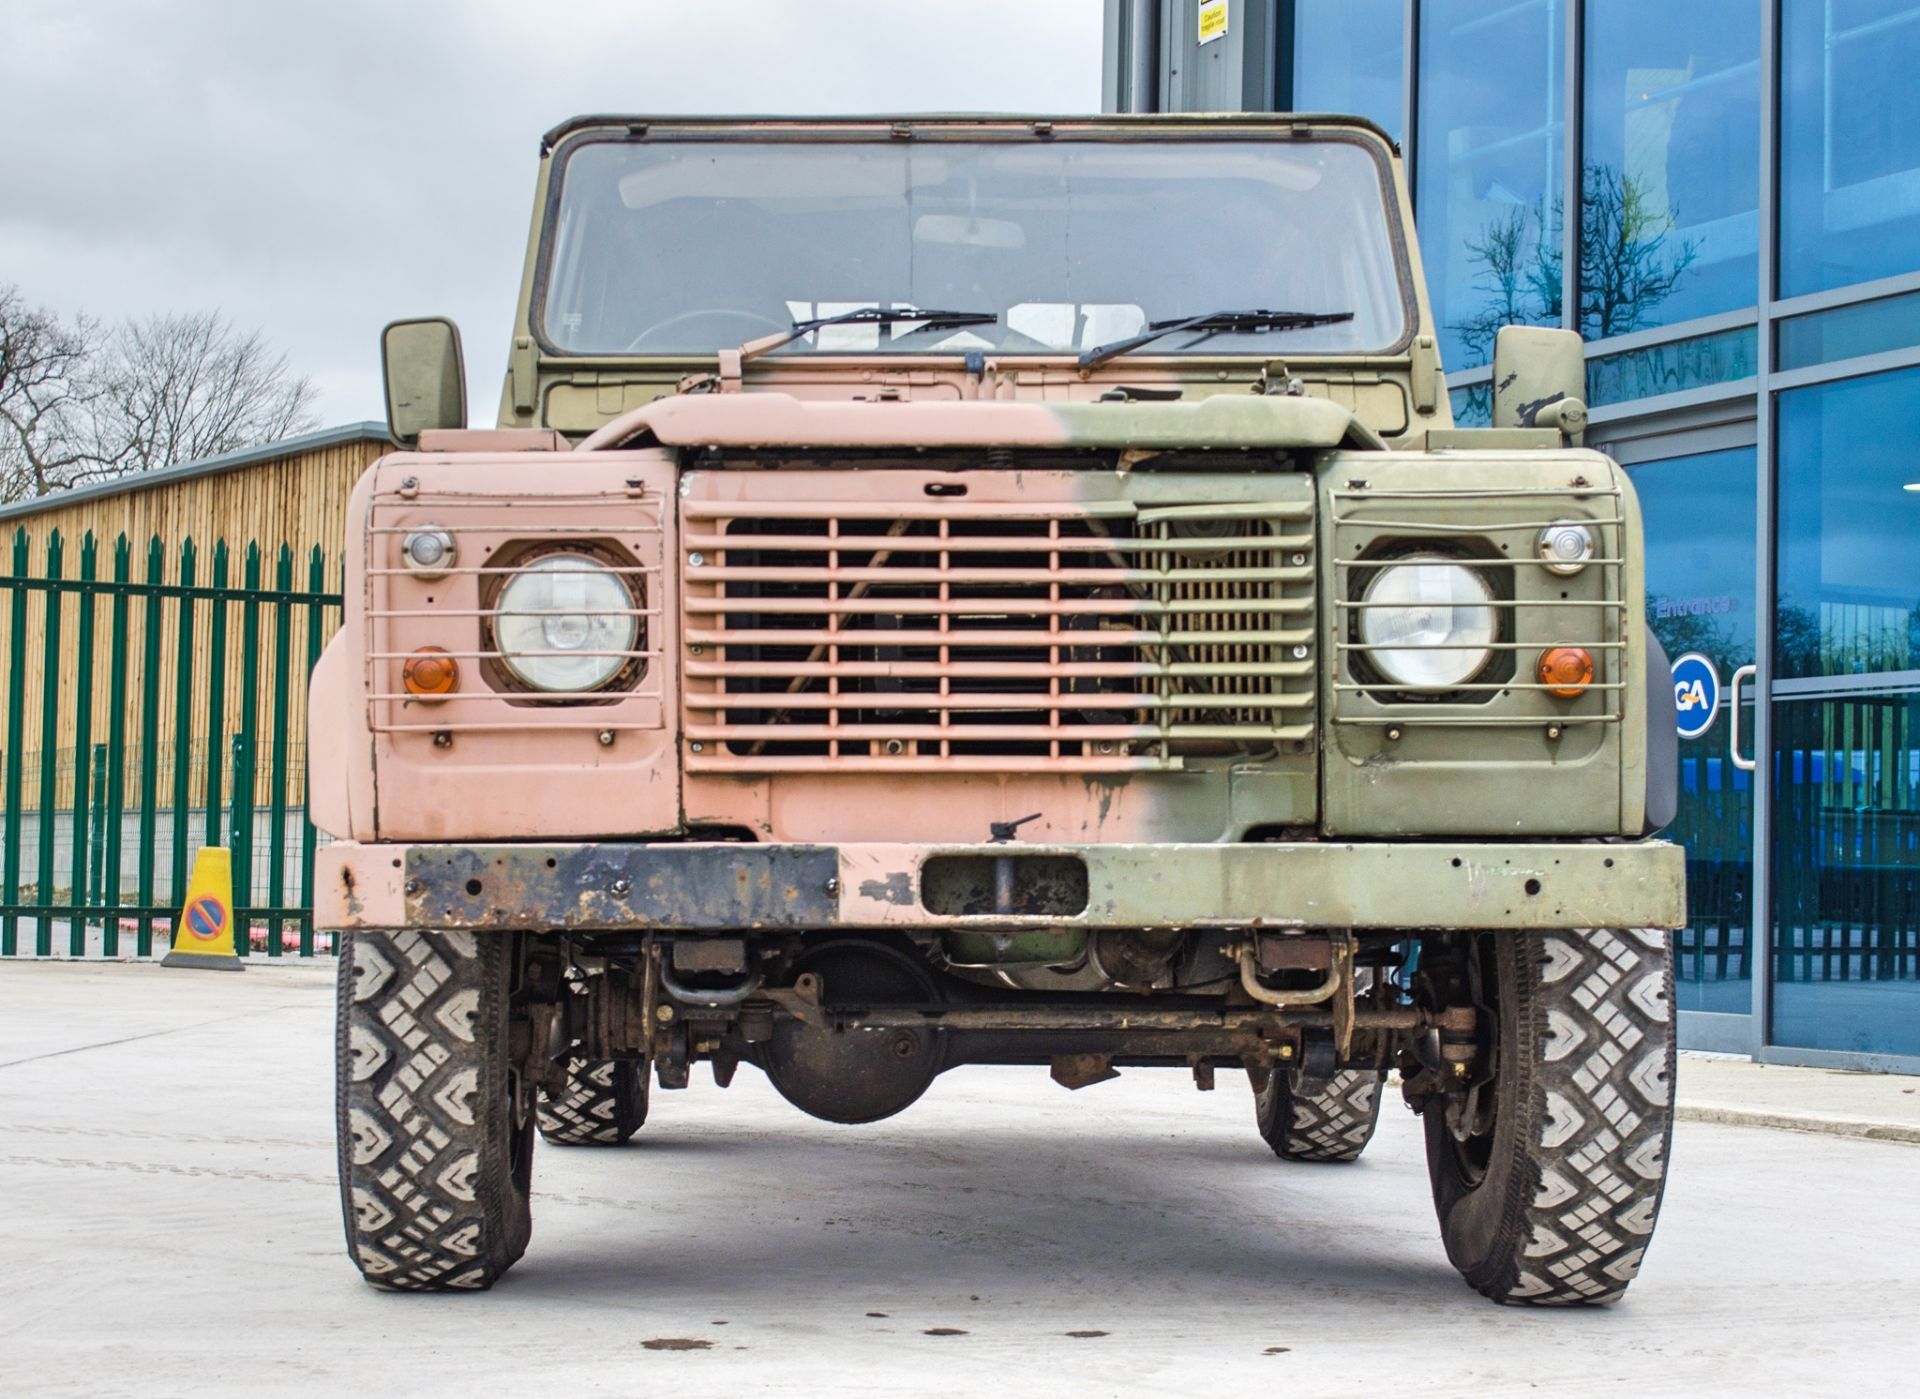 1997 Land Rover Defender 90 WOLF 2.5 litre 300TDI 4 wheel drive utility vehicle Ex MOD - Image 9 of 45